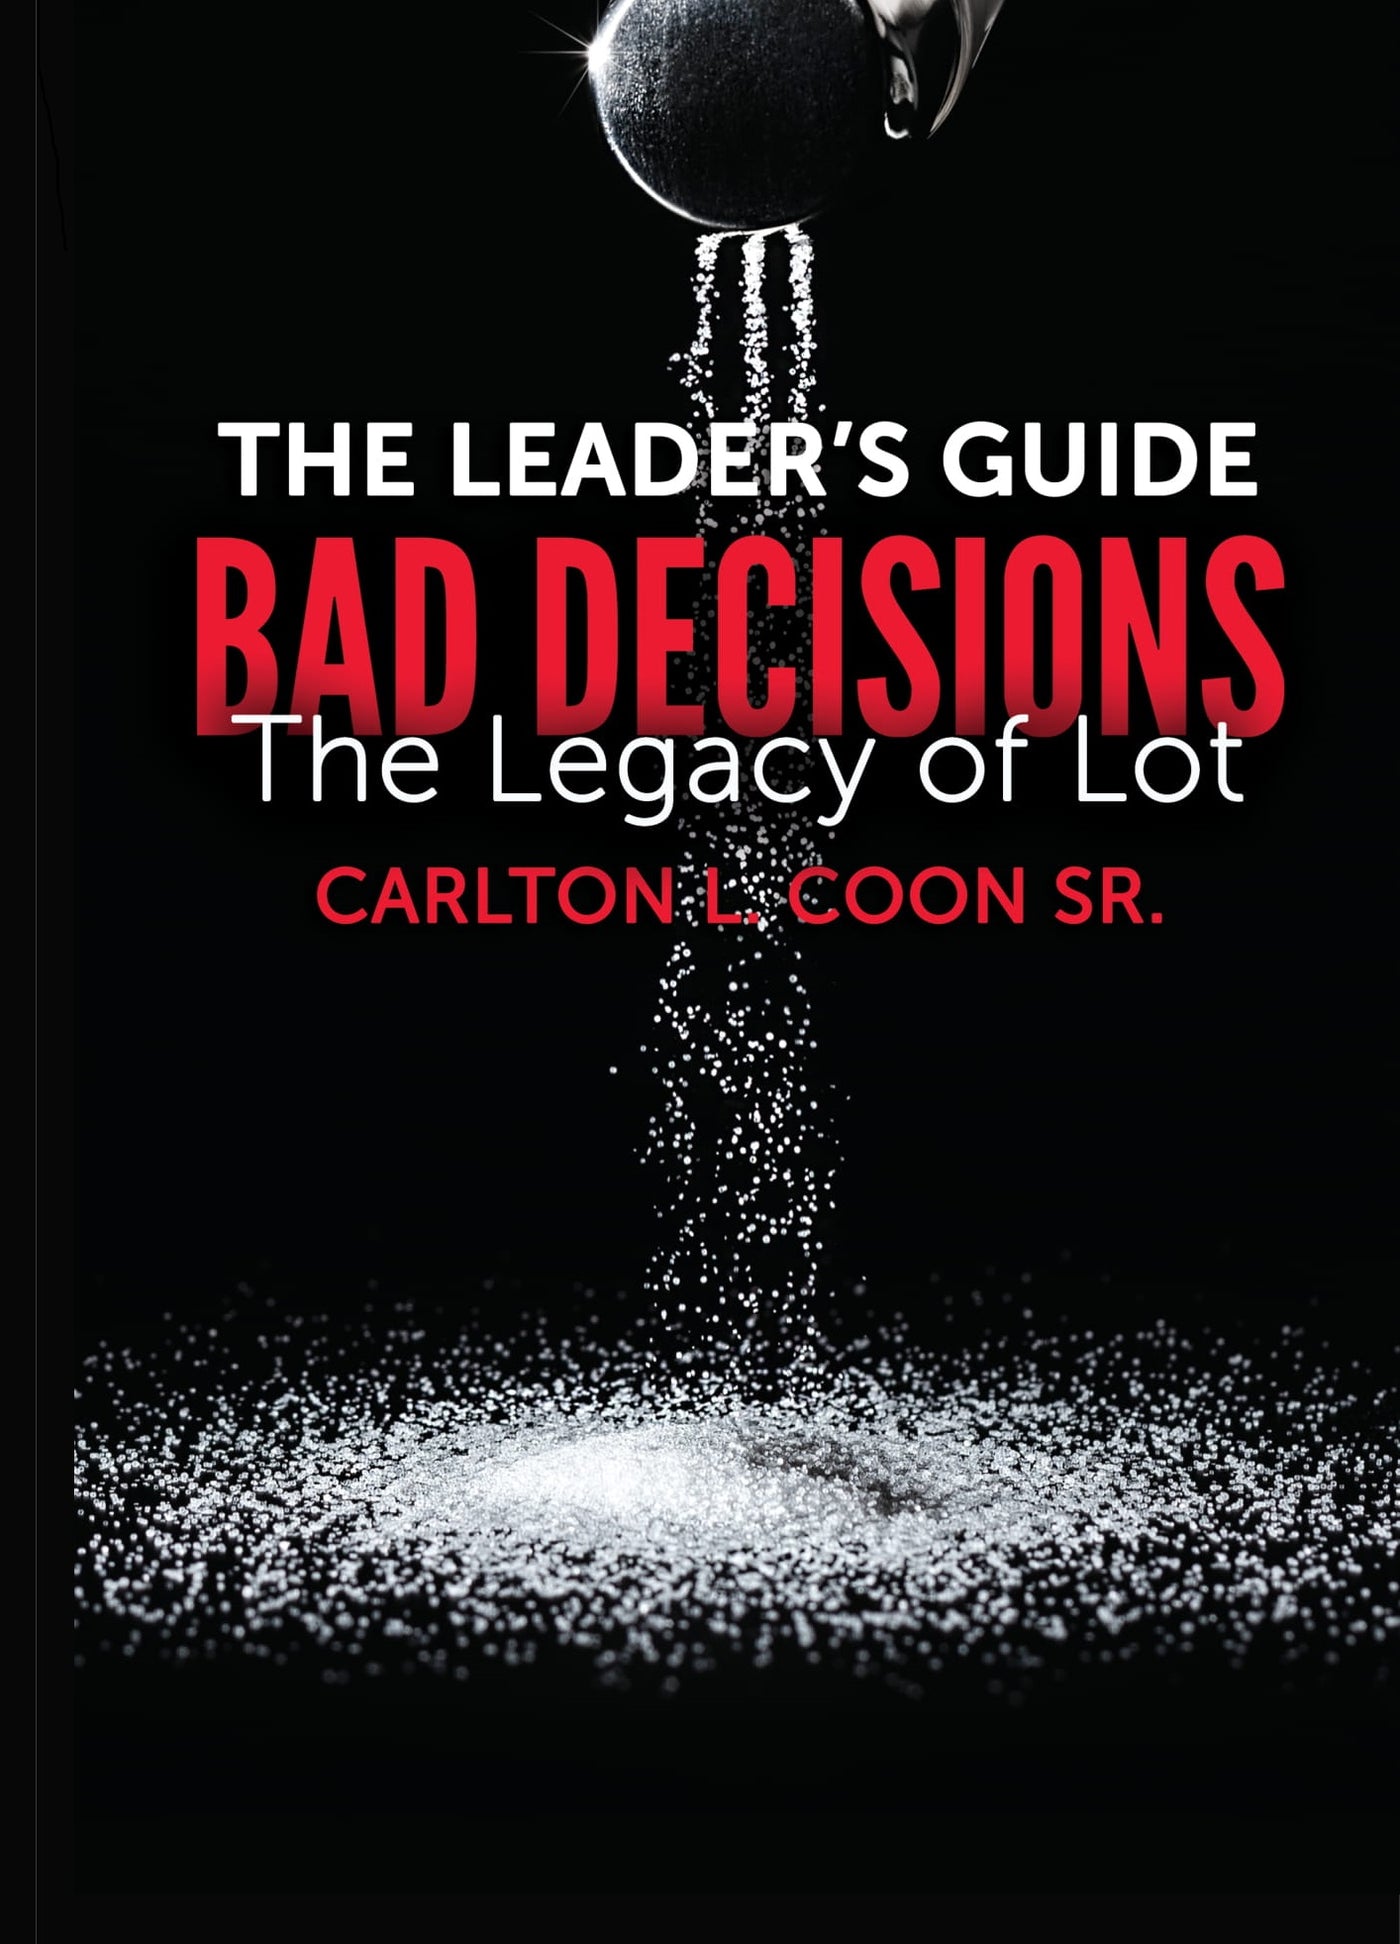 Leader's Guide for Bad Decisions - The Legacy of Lot (PDF)